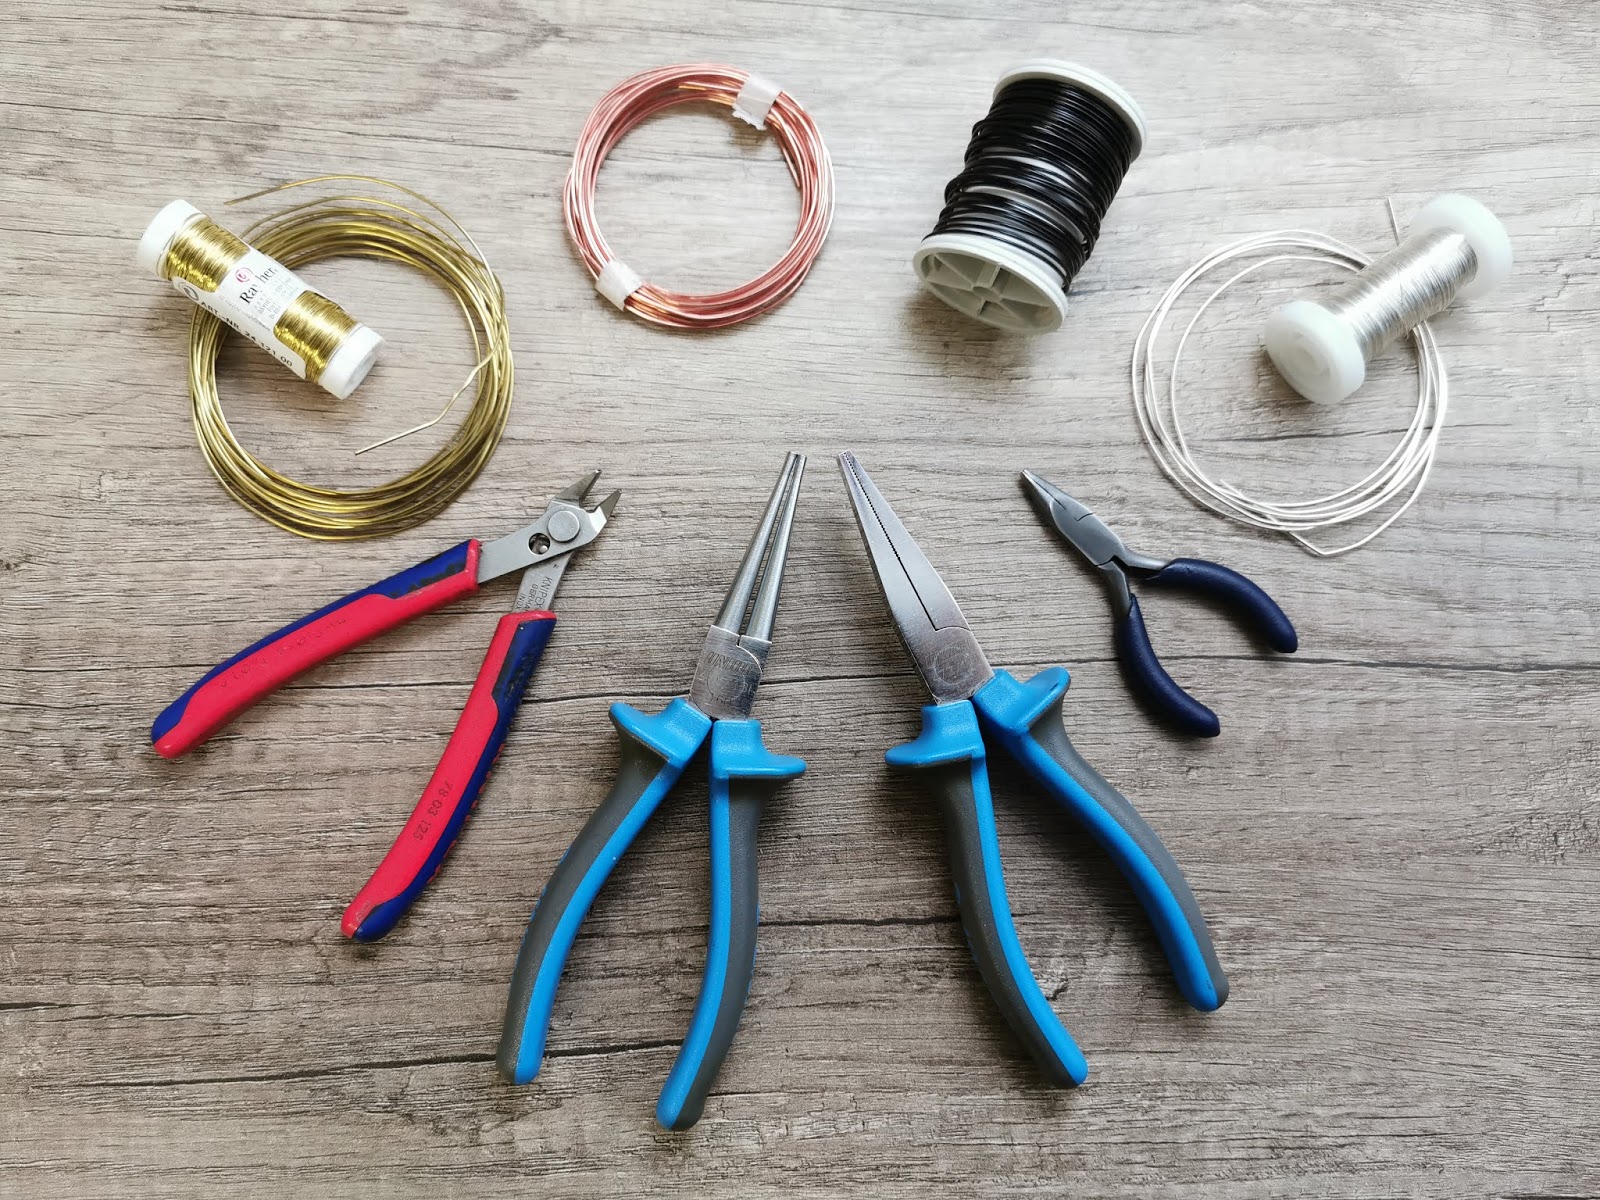 Jessy Herc: Wire-wrapping tools and materials